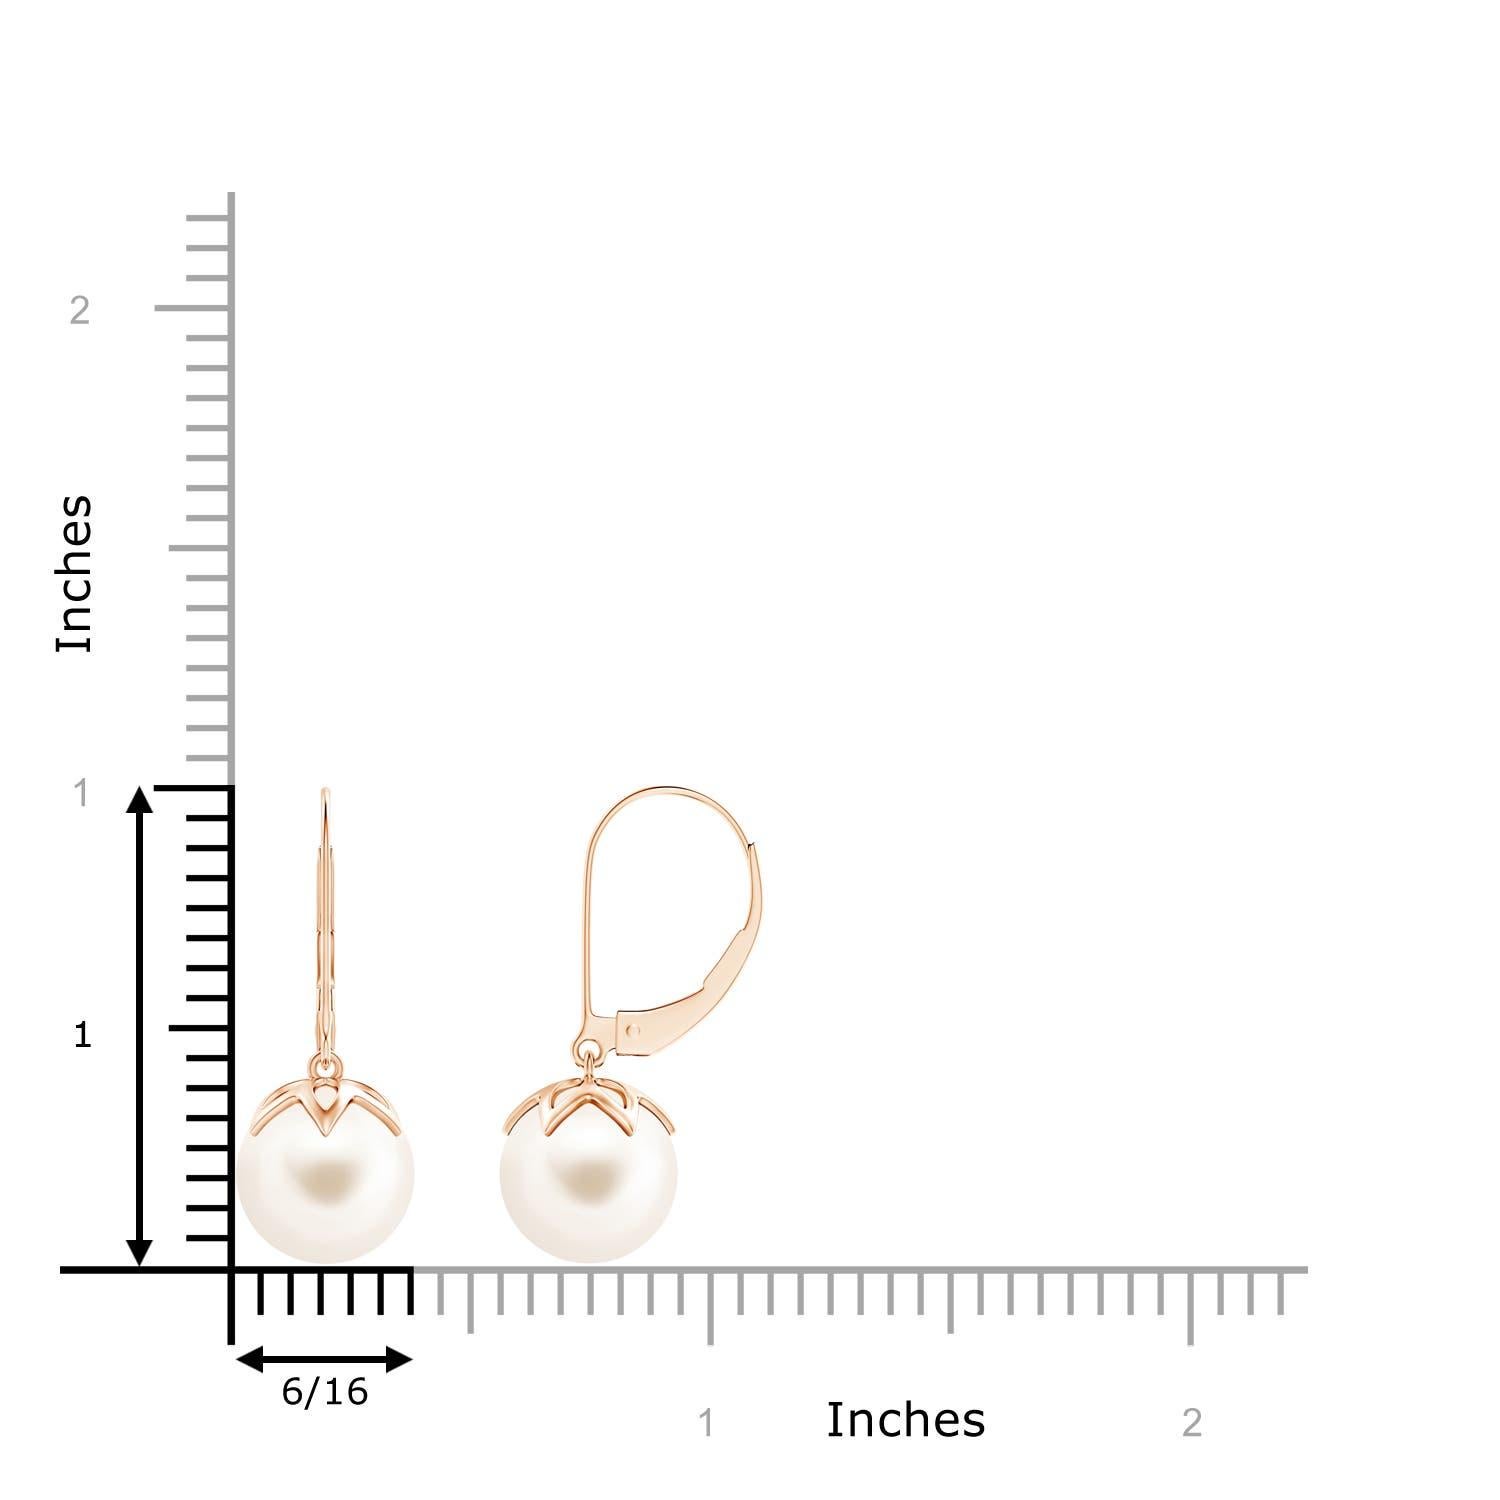 The classic white of the two round peg-set Freshwater cultured pearls is sure to allure. Crafted in 14K rose gold, these dangling pearl earrings will give you a polished look for the day as well as the night. Match these pearl ball drop earrings